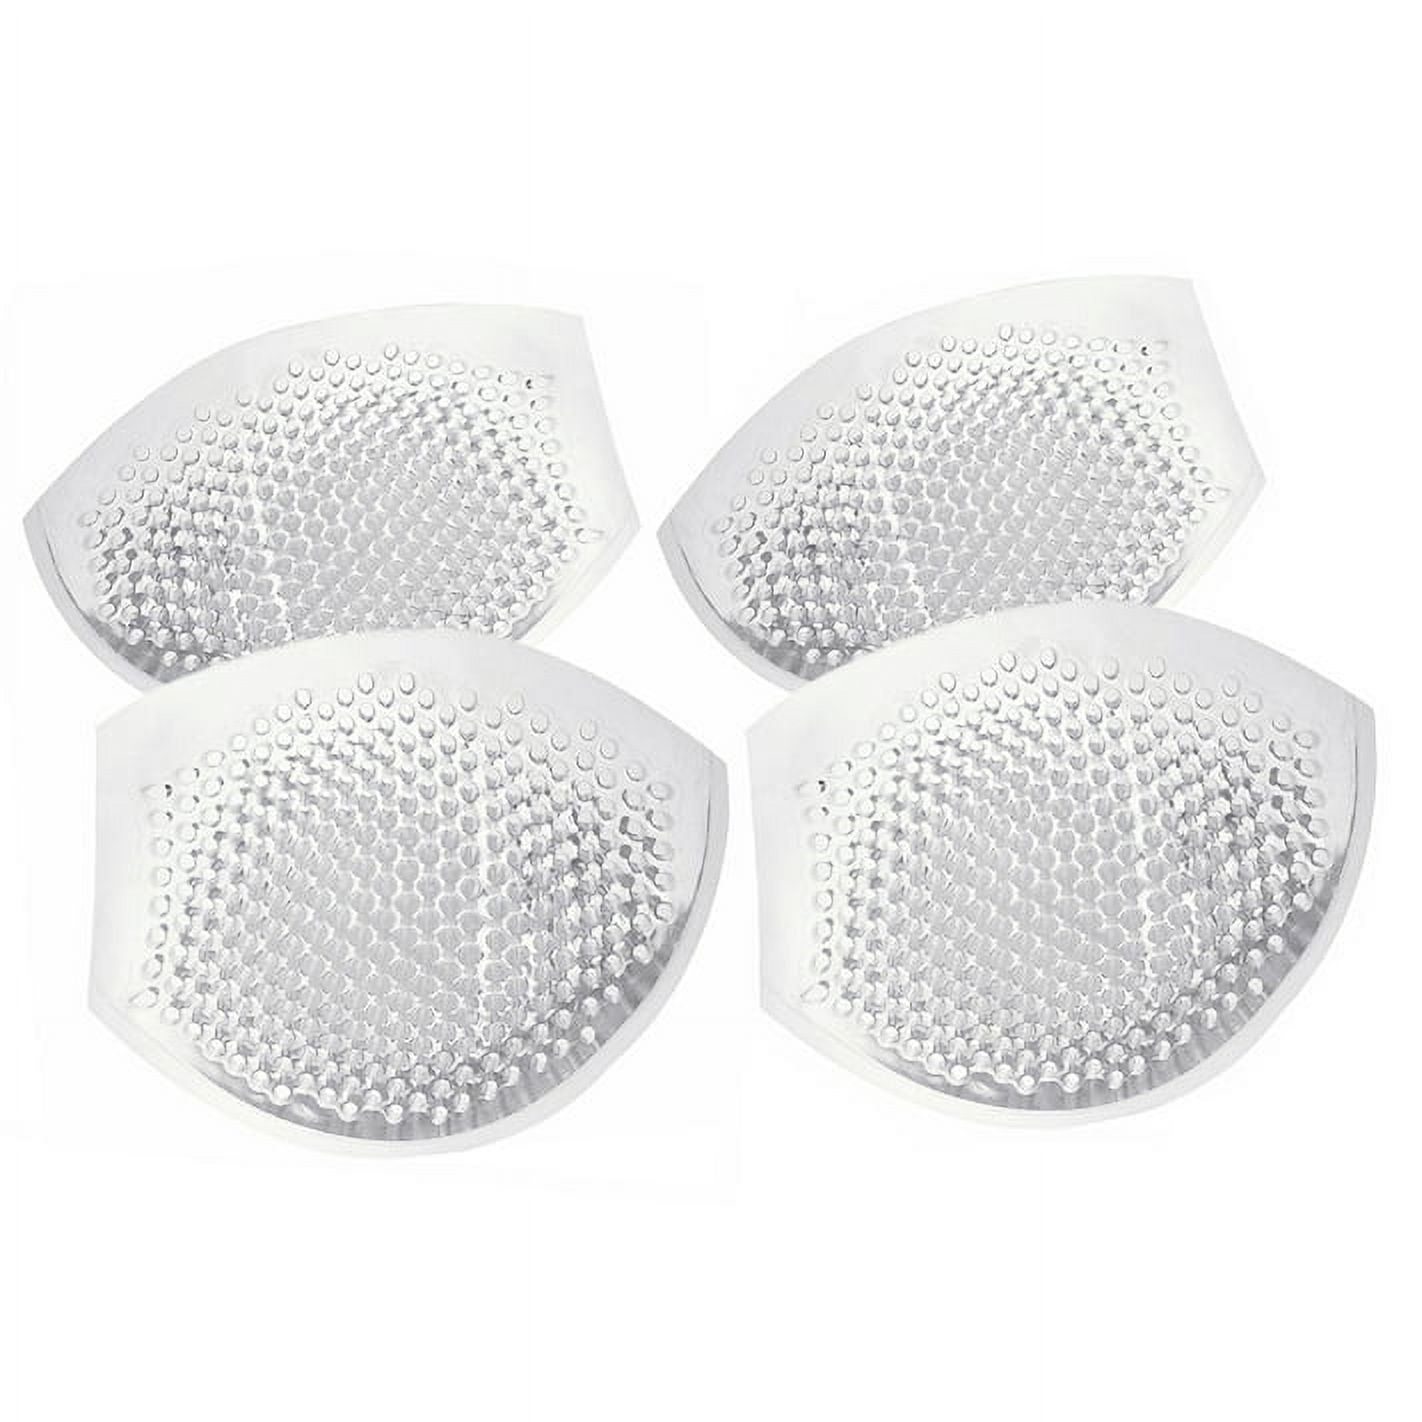 Bra Insert Breast Pad Silicone Bra Enhancer Increase Your Cup Size